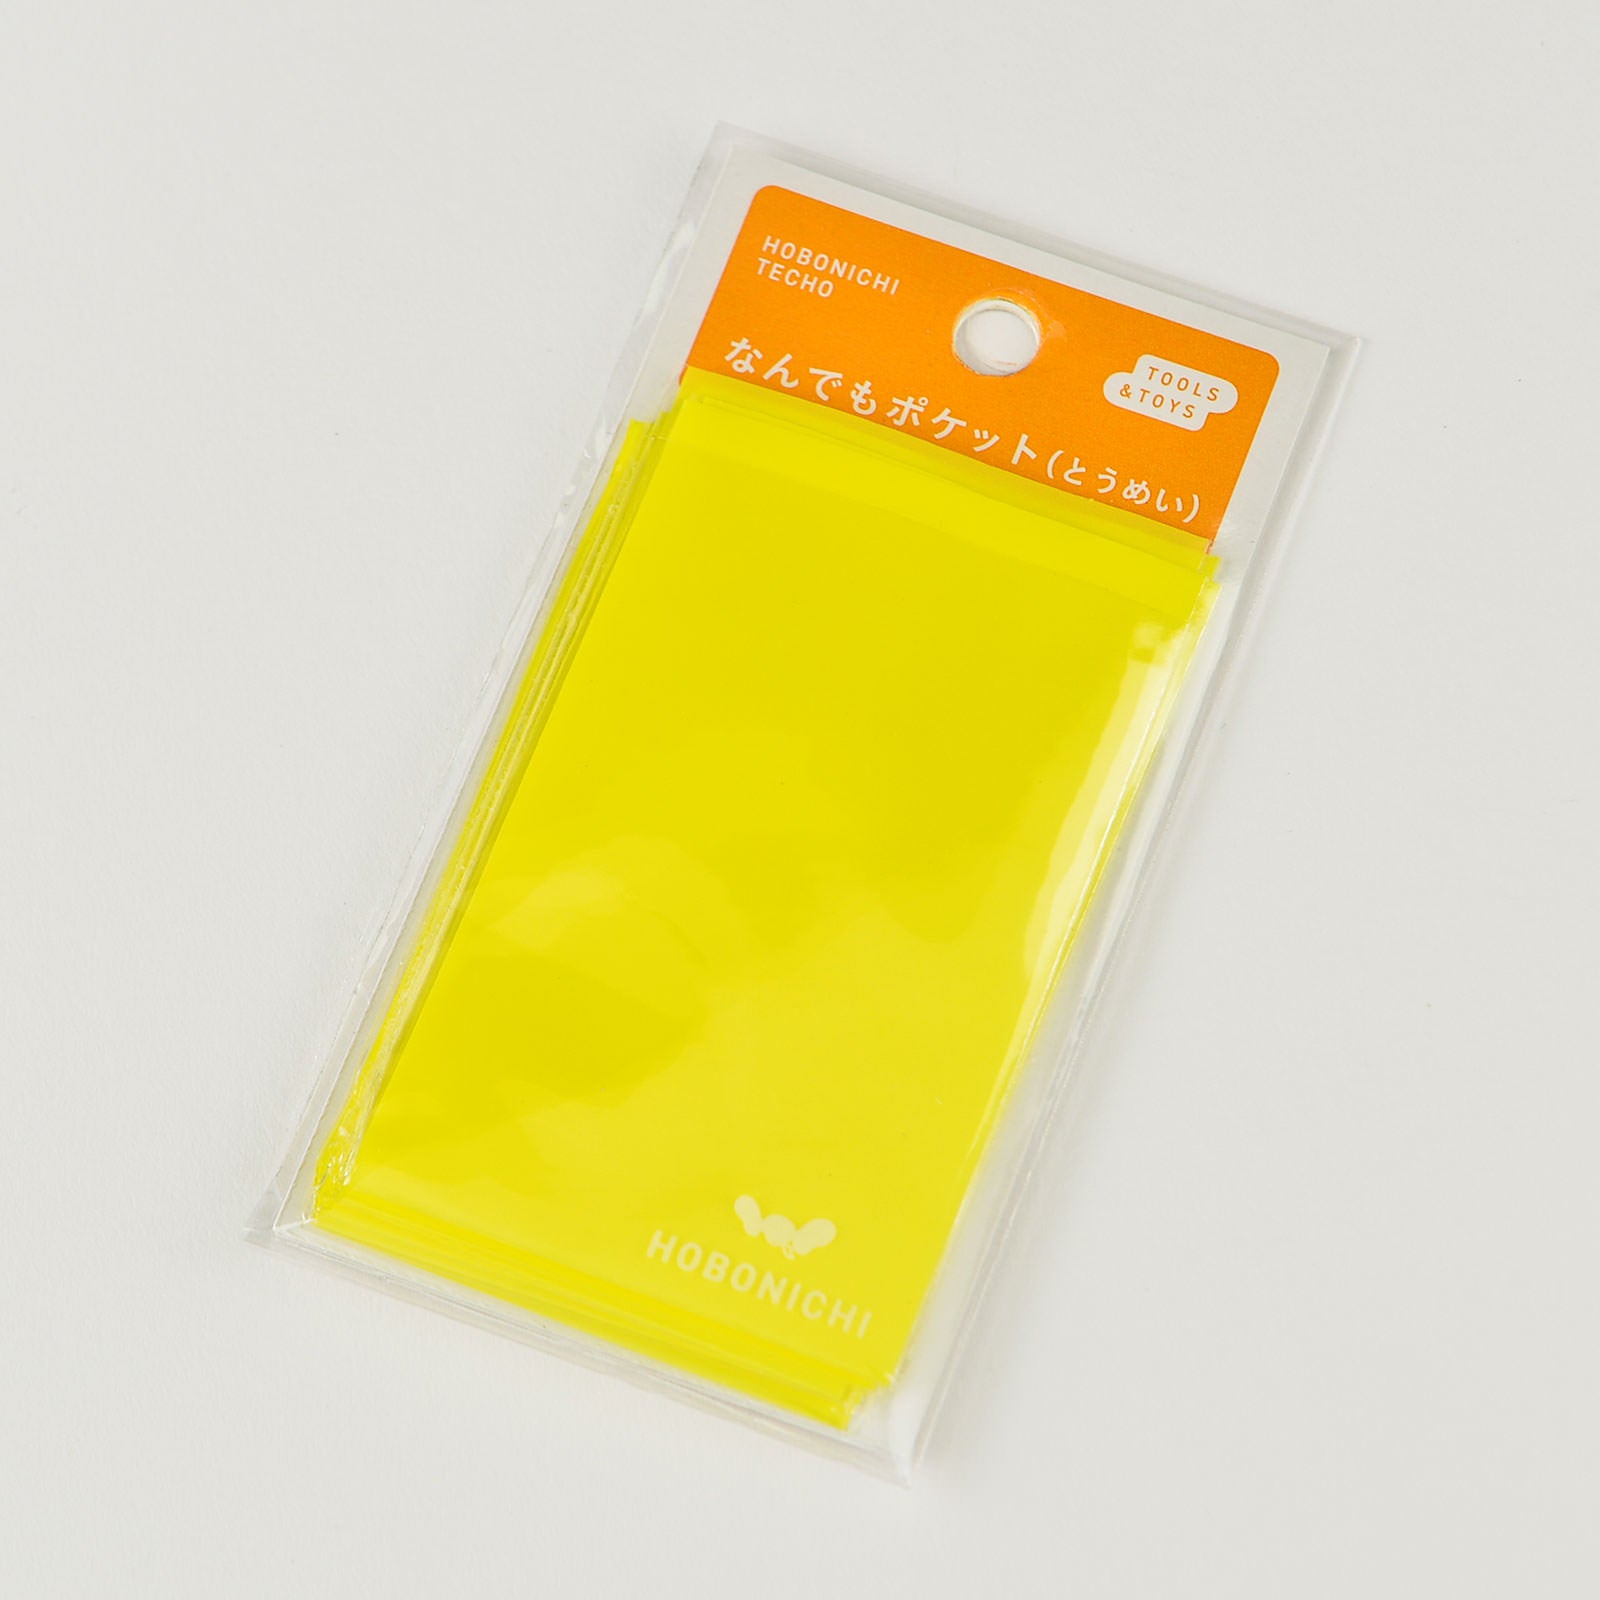 Hobonichi Anything Pocket Clear  This adhesive clear envelope can be attached to a page in your techo and provide a storage pocket. Pocket is made of thin plastic, so it does not make your Hobonichi bulky.  The Anything Pocket is useful for keeping things in your techo that you would prefer not to tape directly to the page. It can be used to store tickets, papers, stickers etc. 